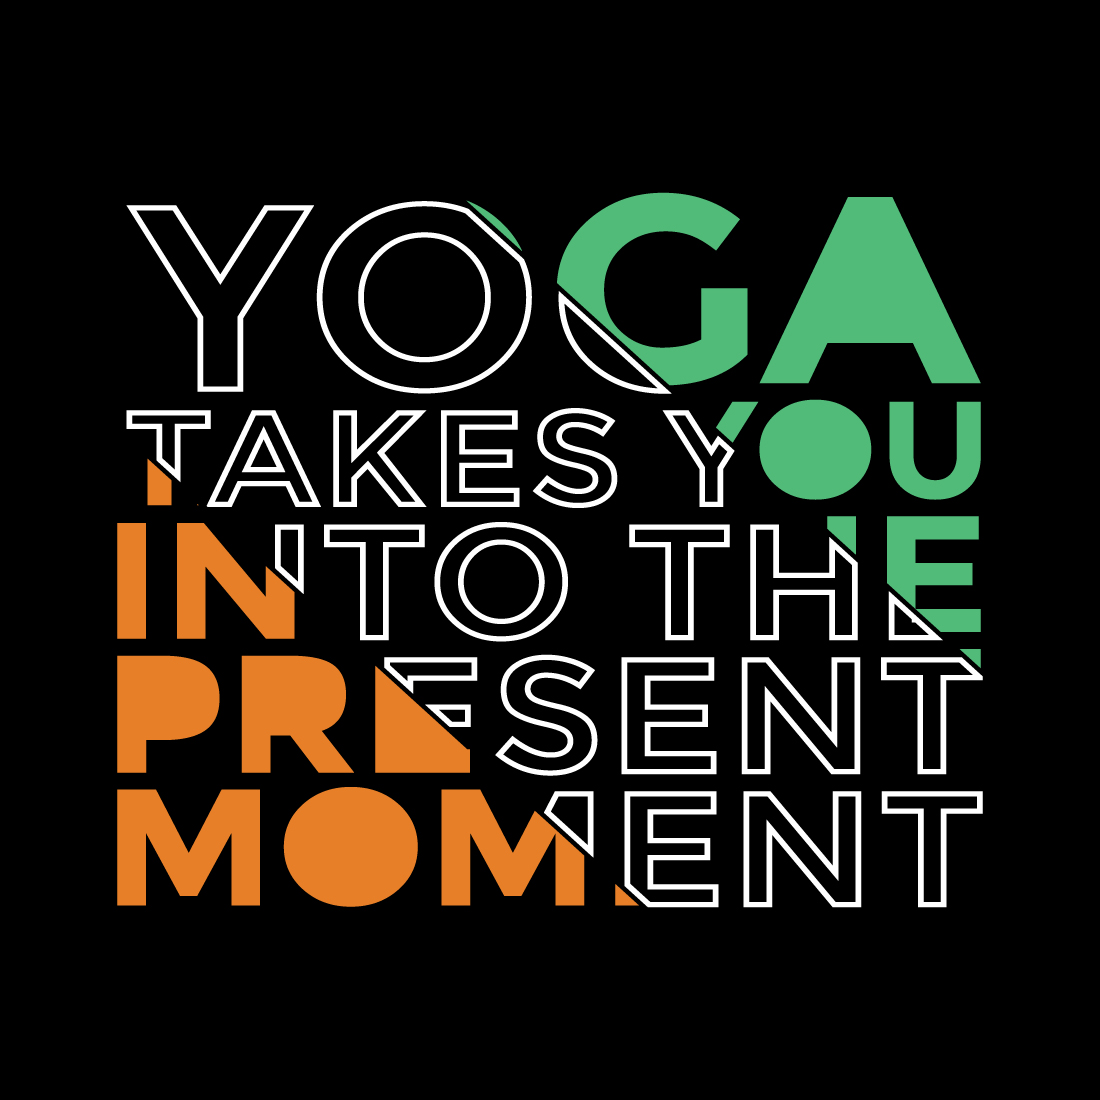 Poster with the words yoga takes you into the present moment.